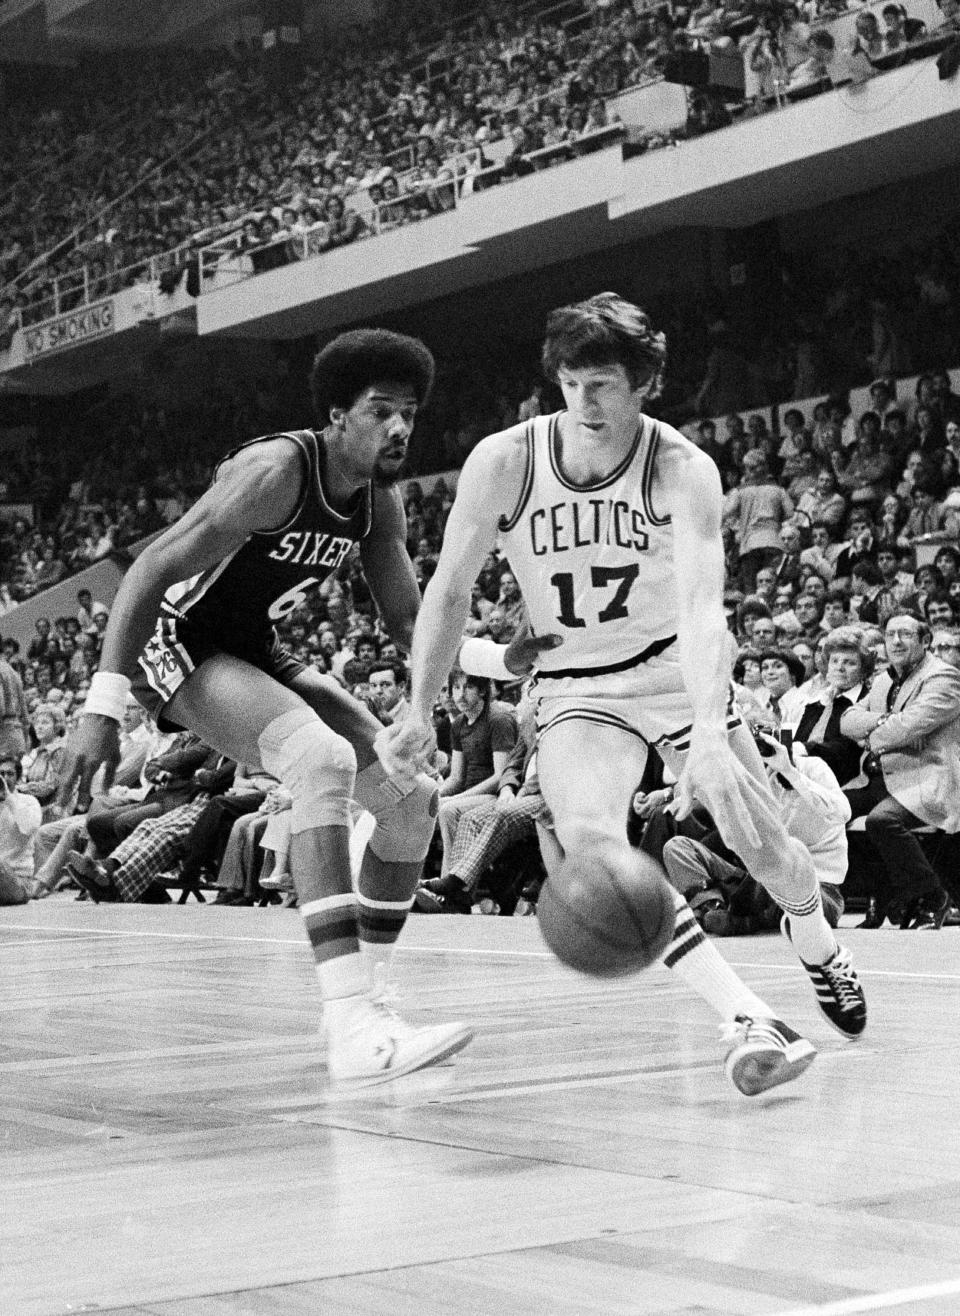 FILE - In this April 29, 1977 file photo, Boston Celtics' John Havlicek (17) moves the ball past Philadelphia 76ers' Julius Erving during an NBA basketball game in Boston. The Boston Celtics say Hall of Famer John Havlicek, whose steal of Hal Green’s inbounds pass in the final seconds of the 1965 Eastern Conference finals against the Philadelphia 76ers remains one of the most famous plays in NBA history, has died. The team says Havlicek died Thursday, April 25, 2019 at age 79.